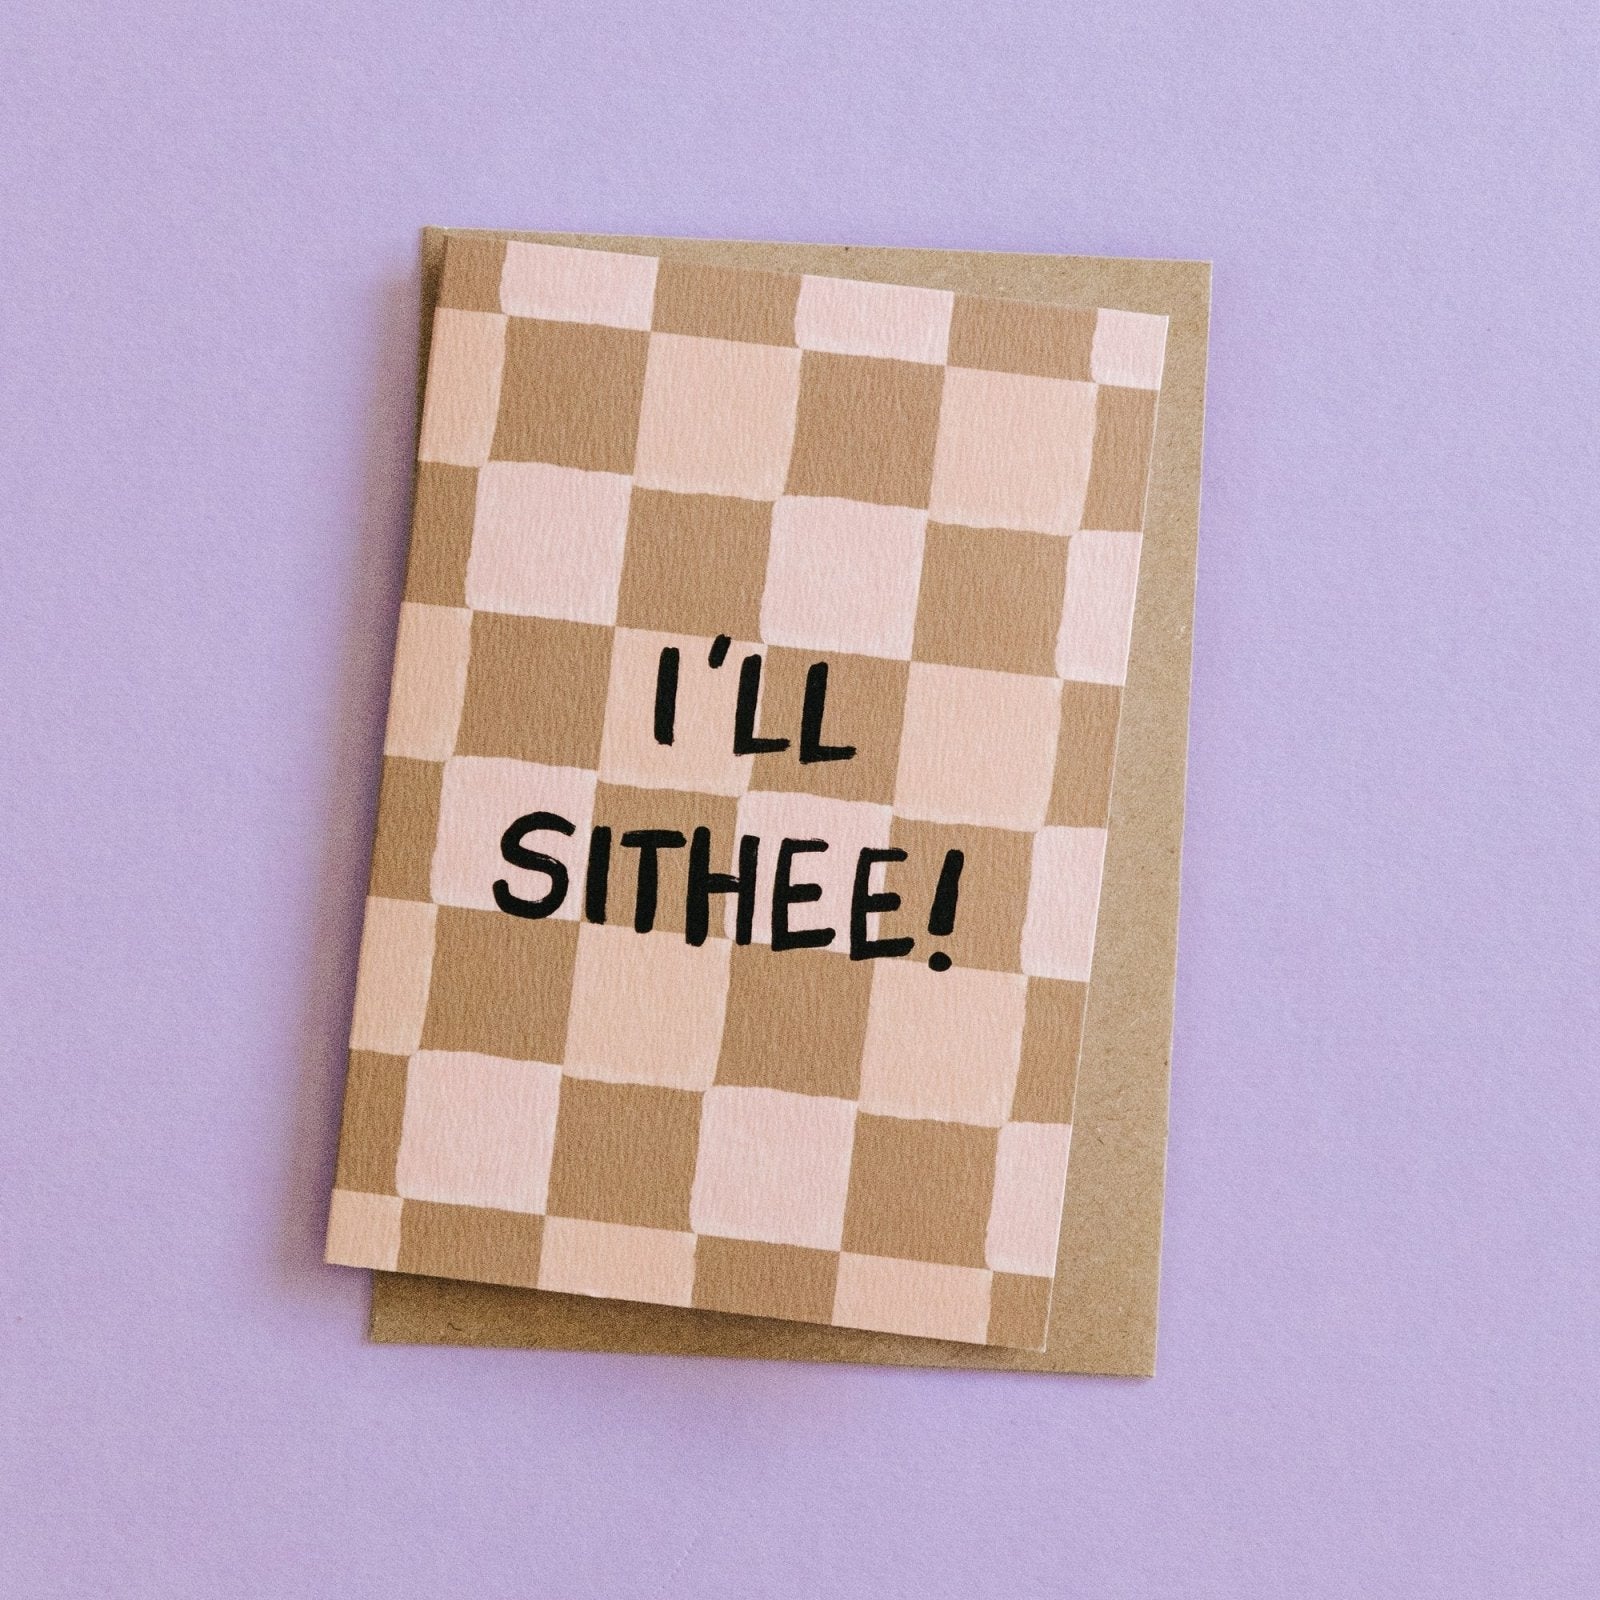 I'll Sithee! Yorkshire Dialect Funny Leaving Card - I am Nat Ltd - Greeting Card